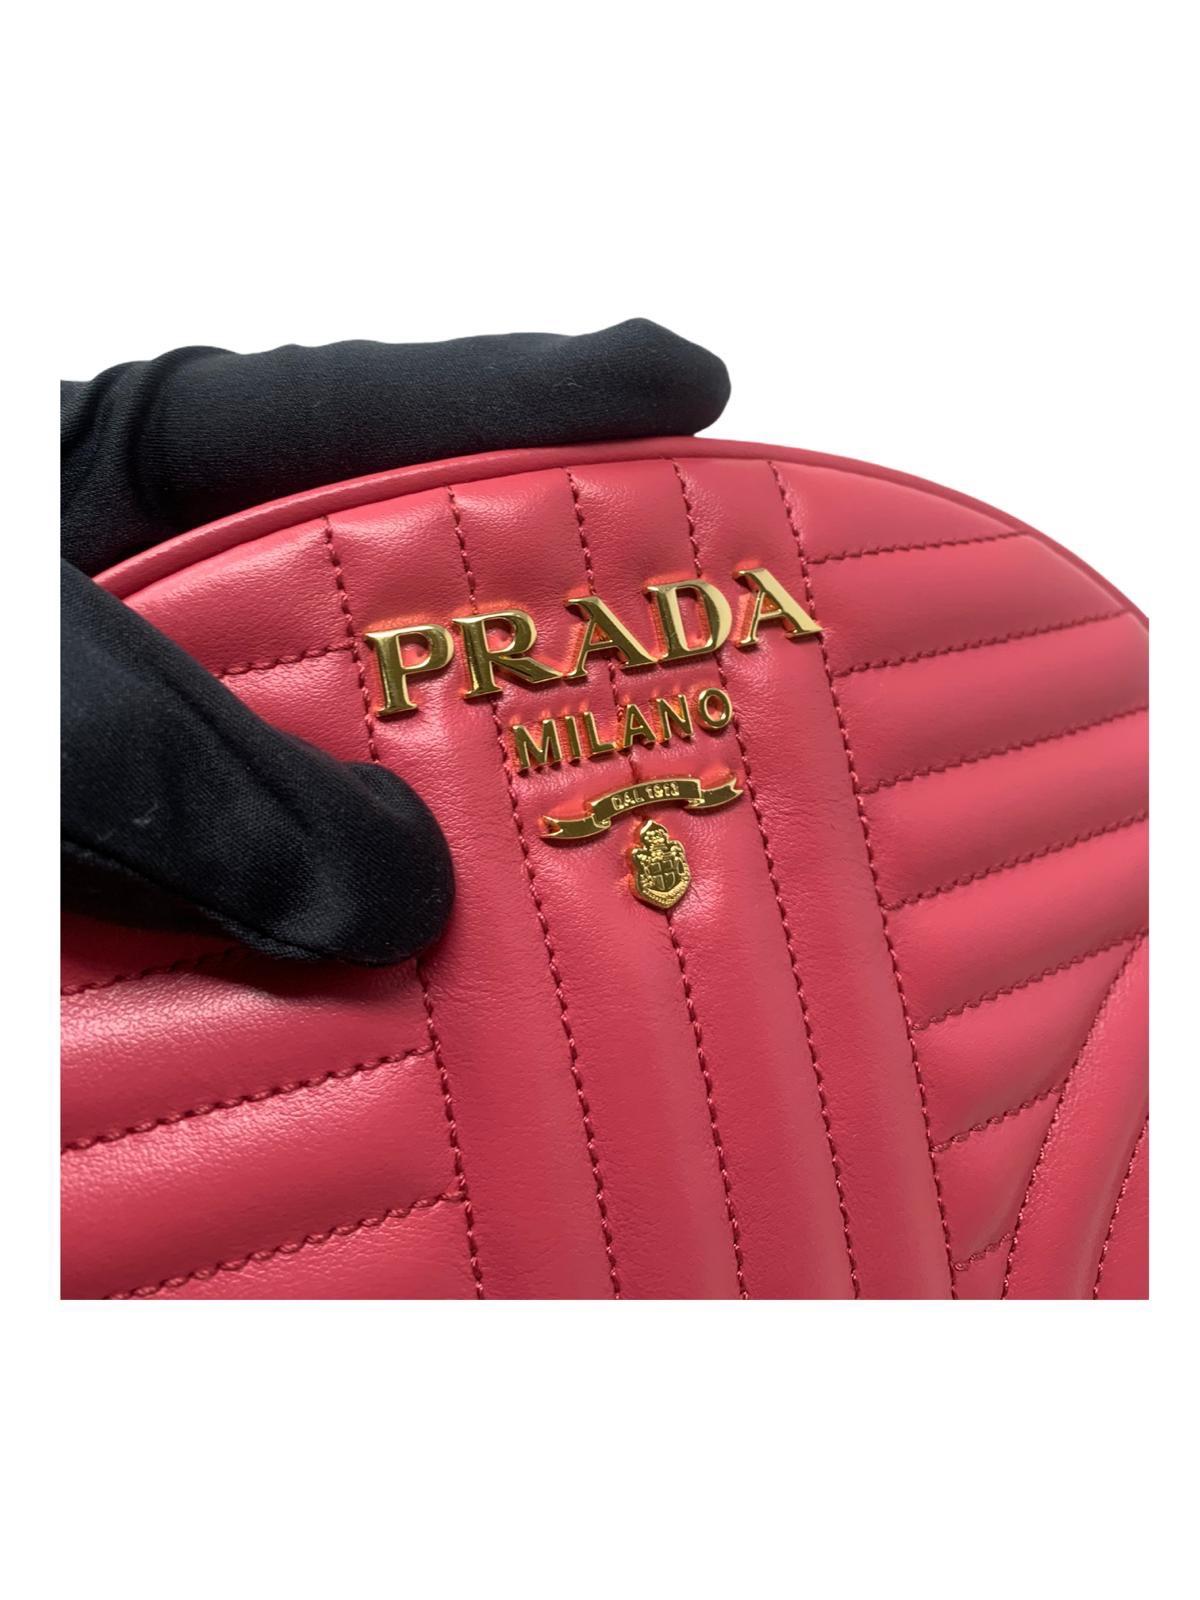 Signed by the metal lettering logo, the Prada Diagramme leather bag stands out for its matelassé finish.

With topstitching
Adjustable chain shoulder strap in pink leather with shoulder pad
Gold-colored metal finishes
Gold metal lettering logo on